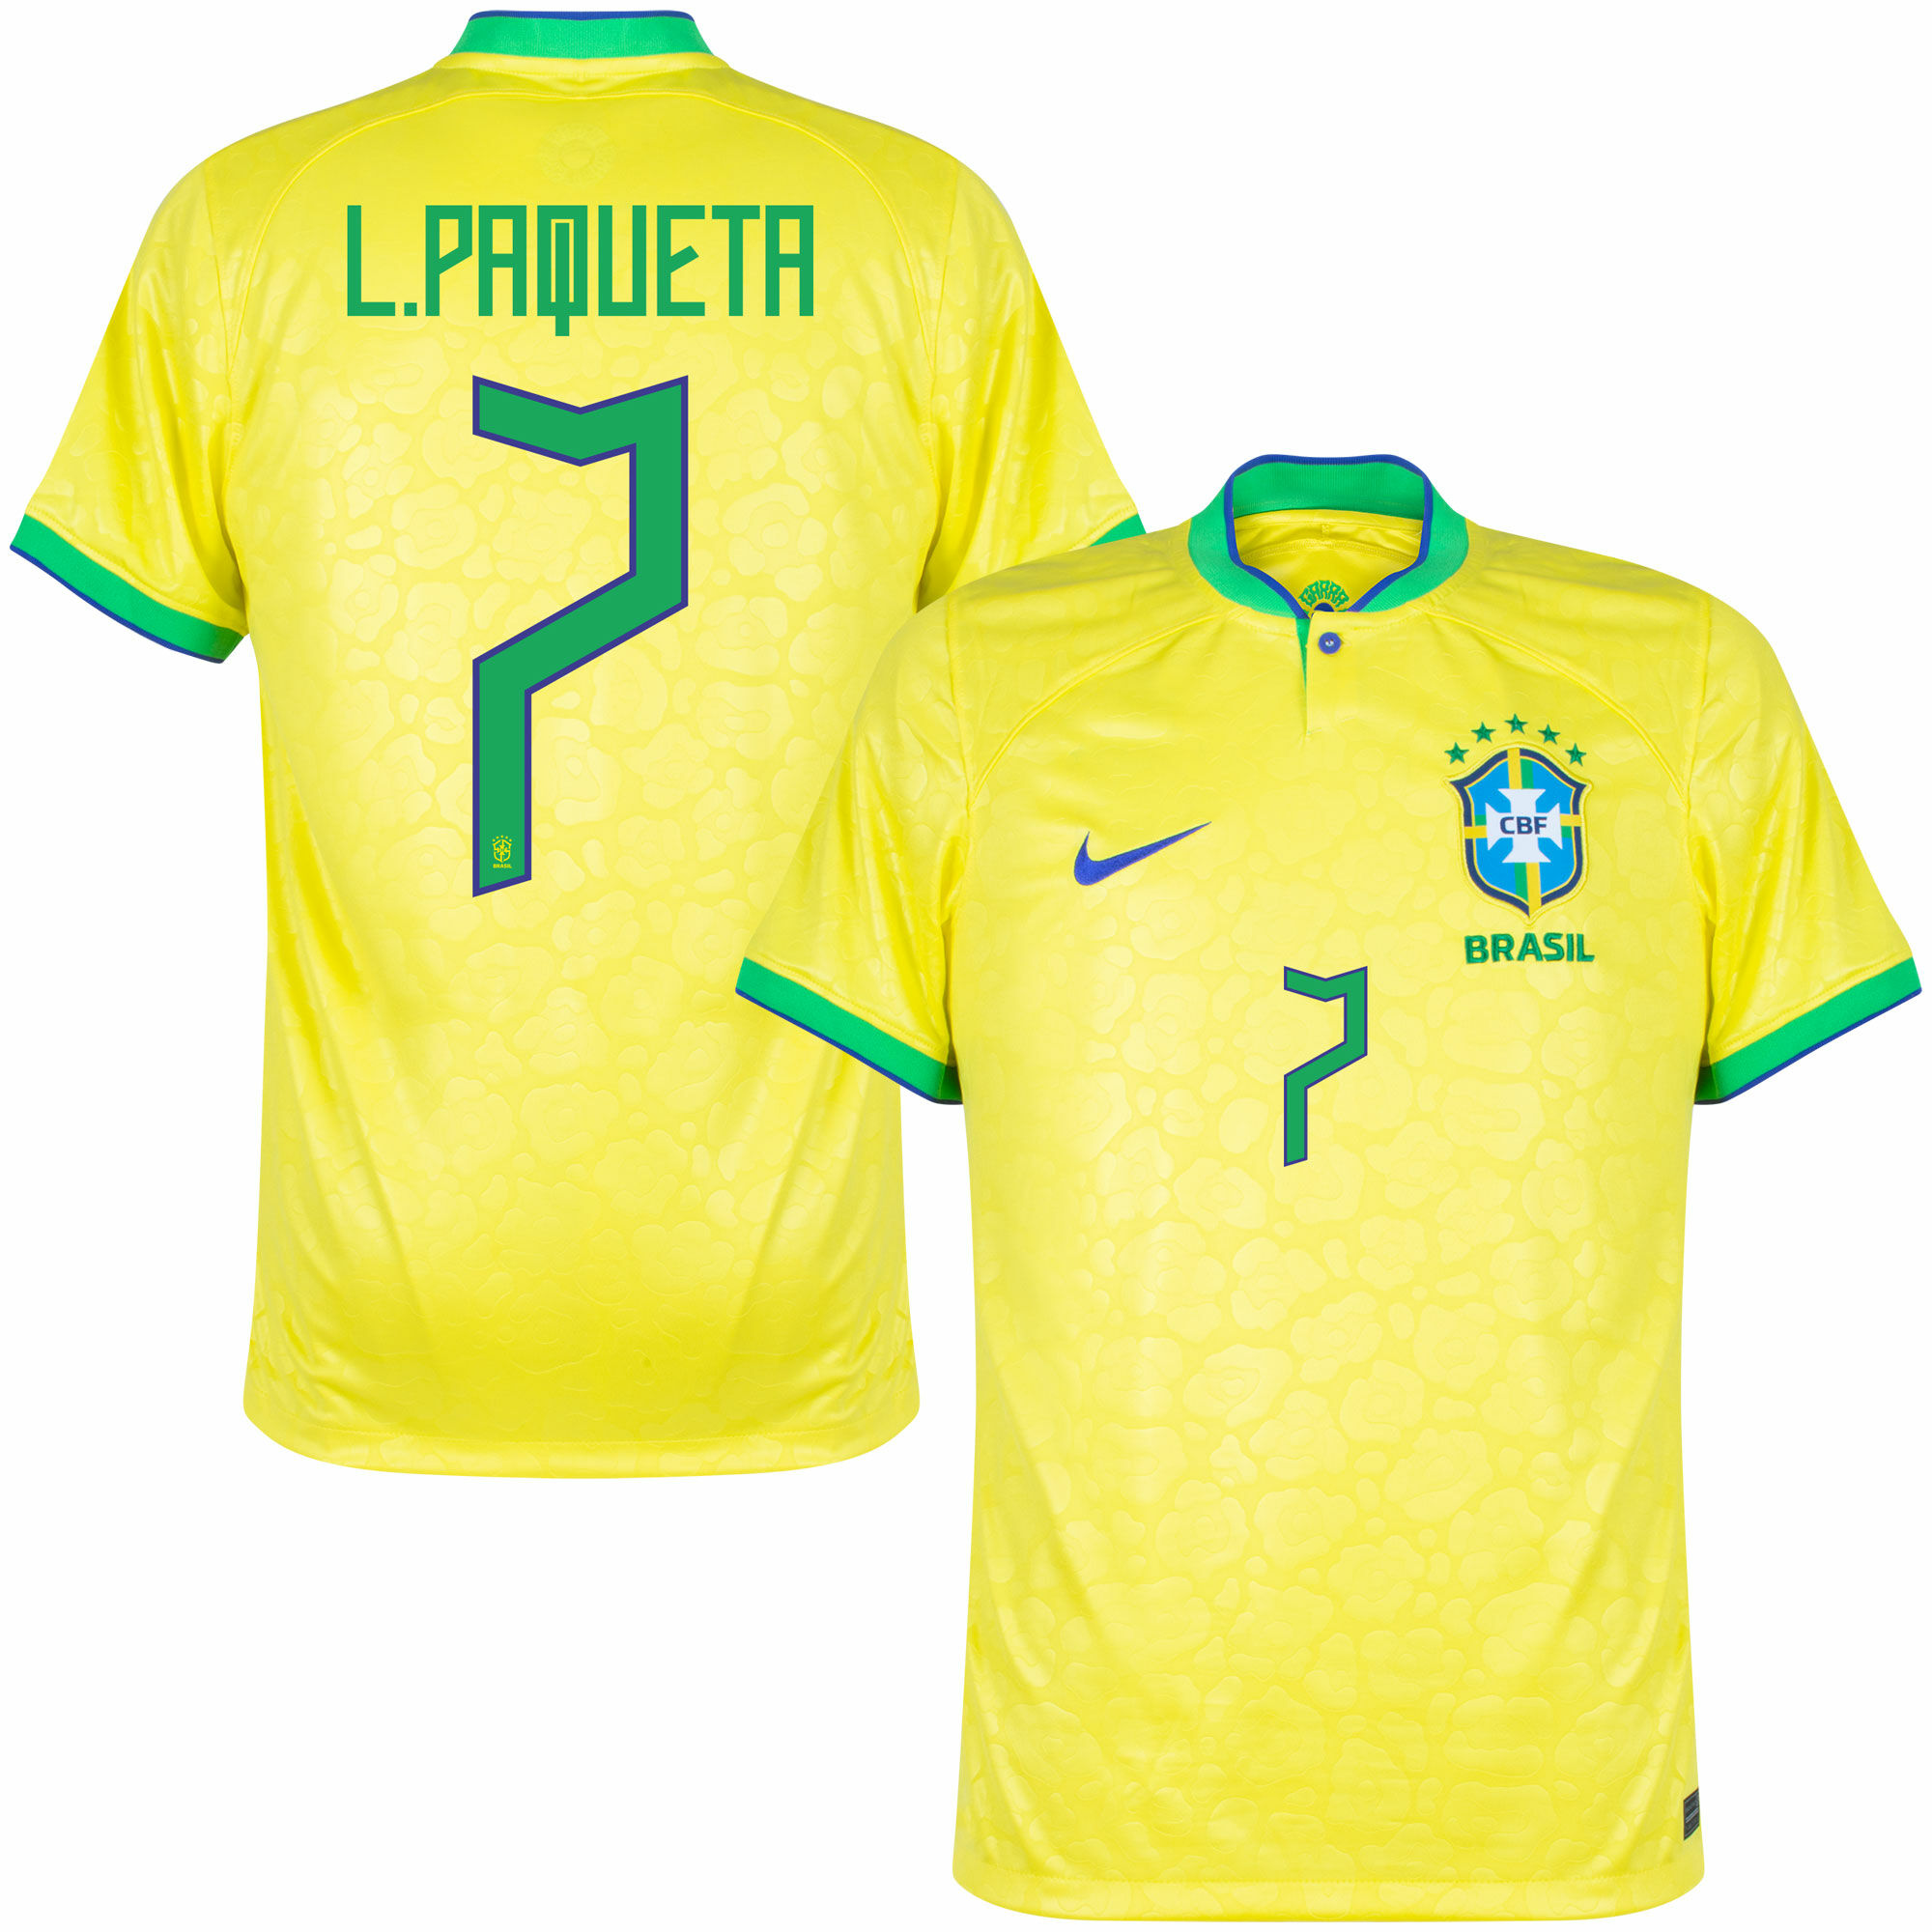 Brazil Soccer Jerseys, Tees, Printing by Subside Sports